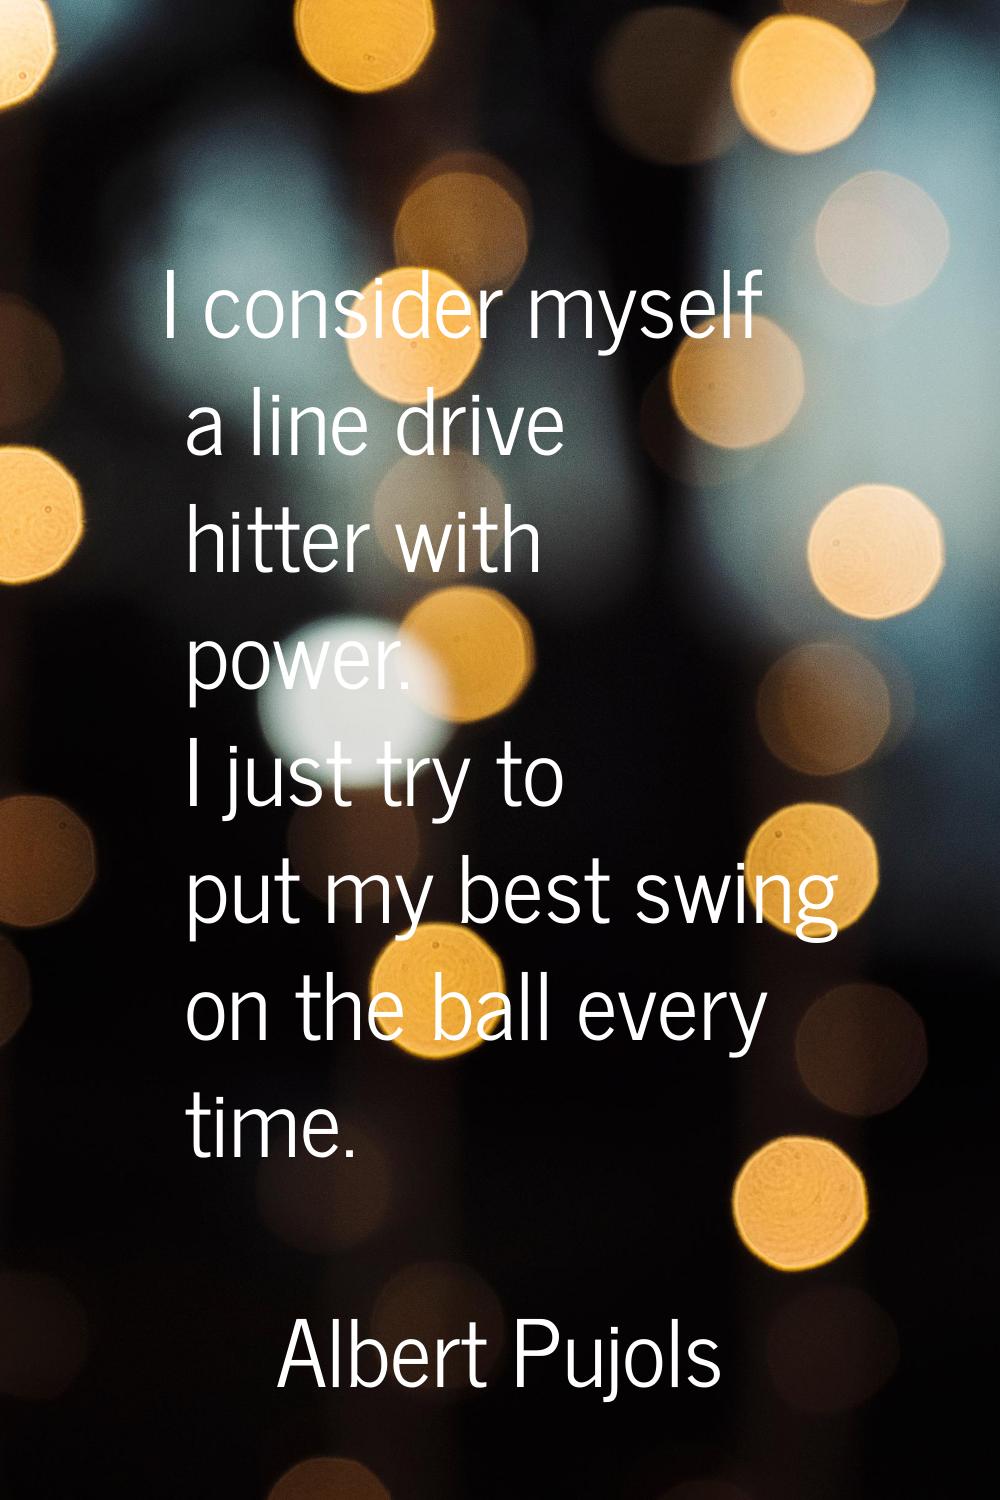 I consider myself a line drive hitter with power. I just try to put my best swing on the ball every